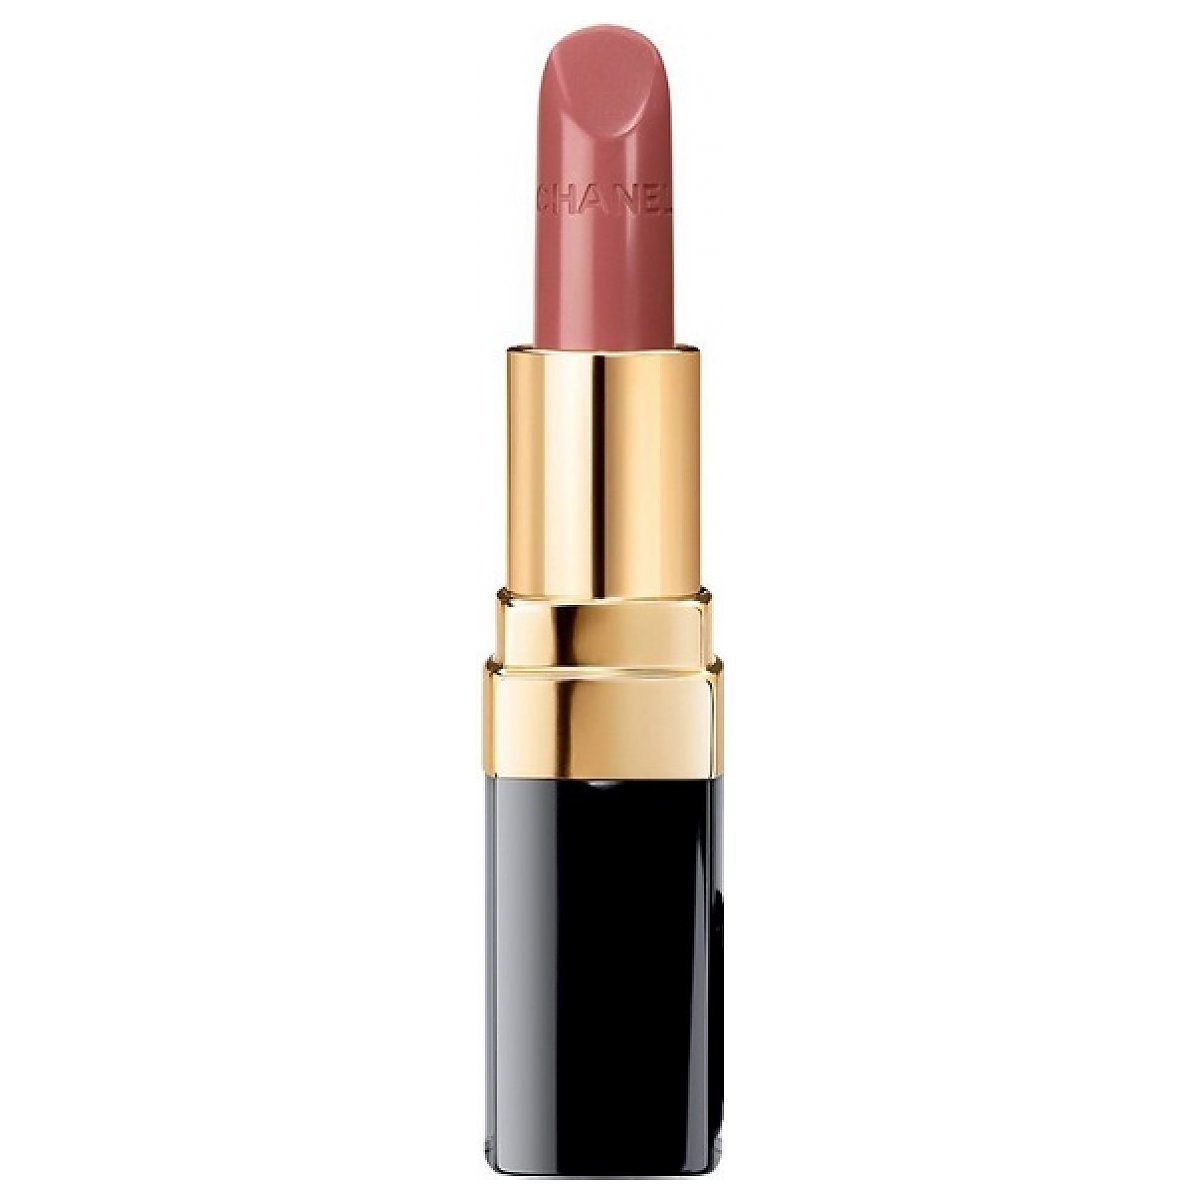 CHANEL Rouge Coco Ultra Hydrating Lip Colour, 402 Adrienne at John